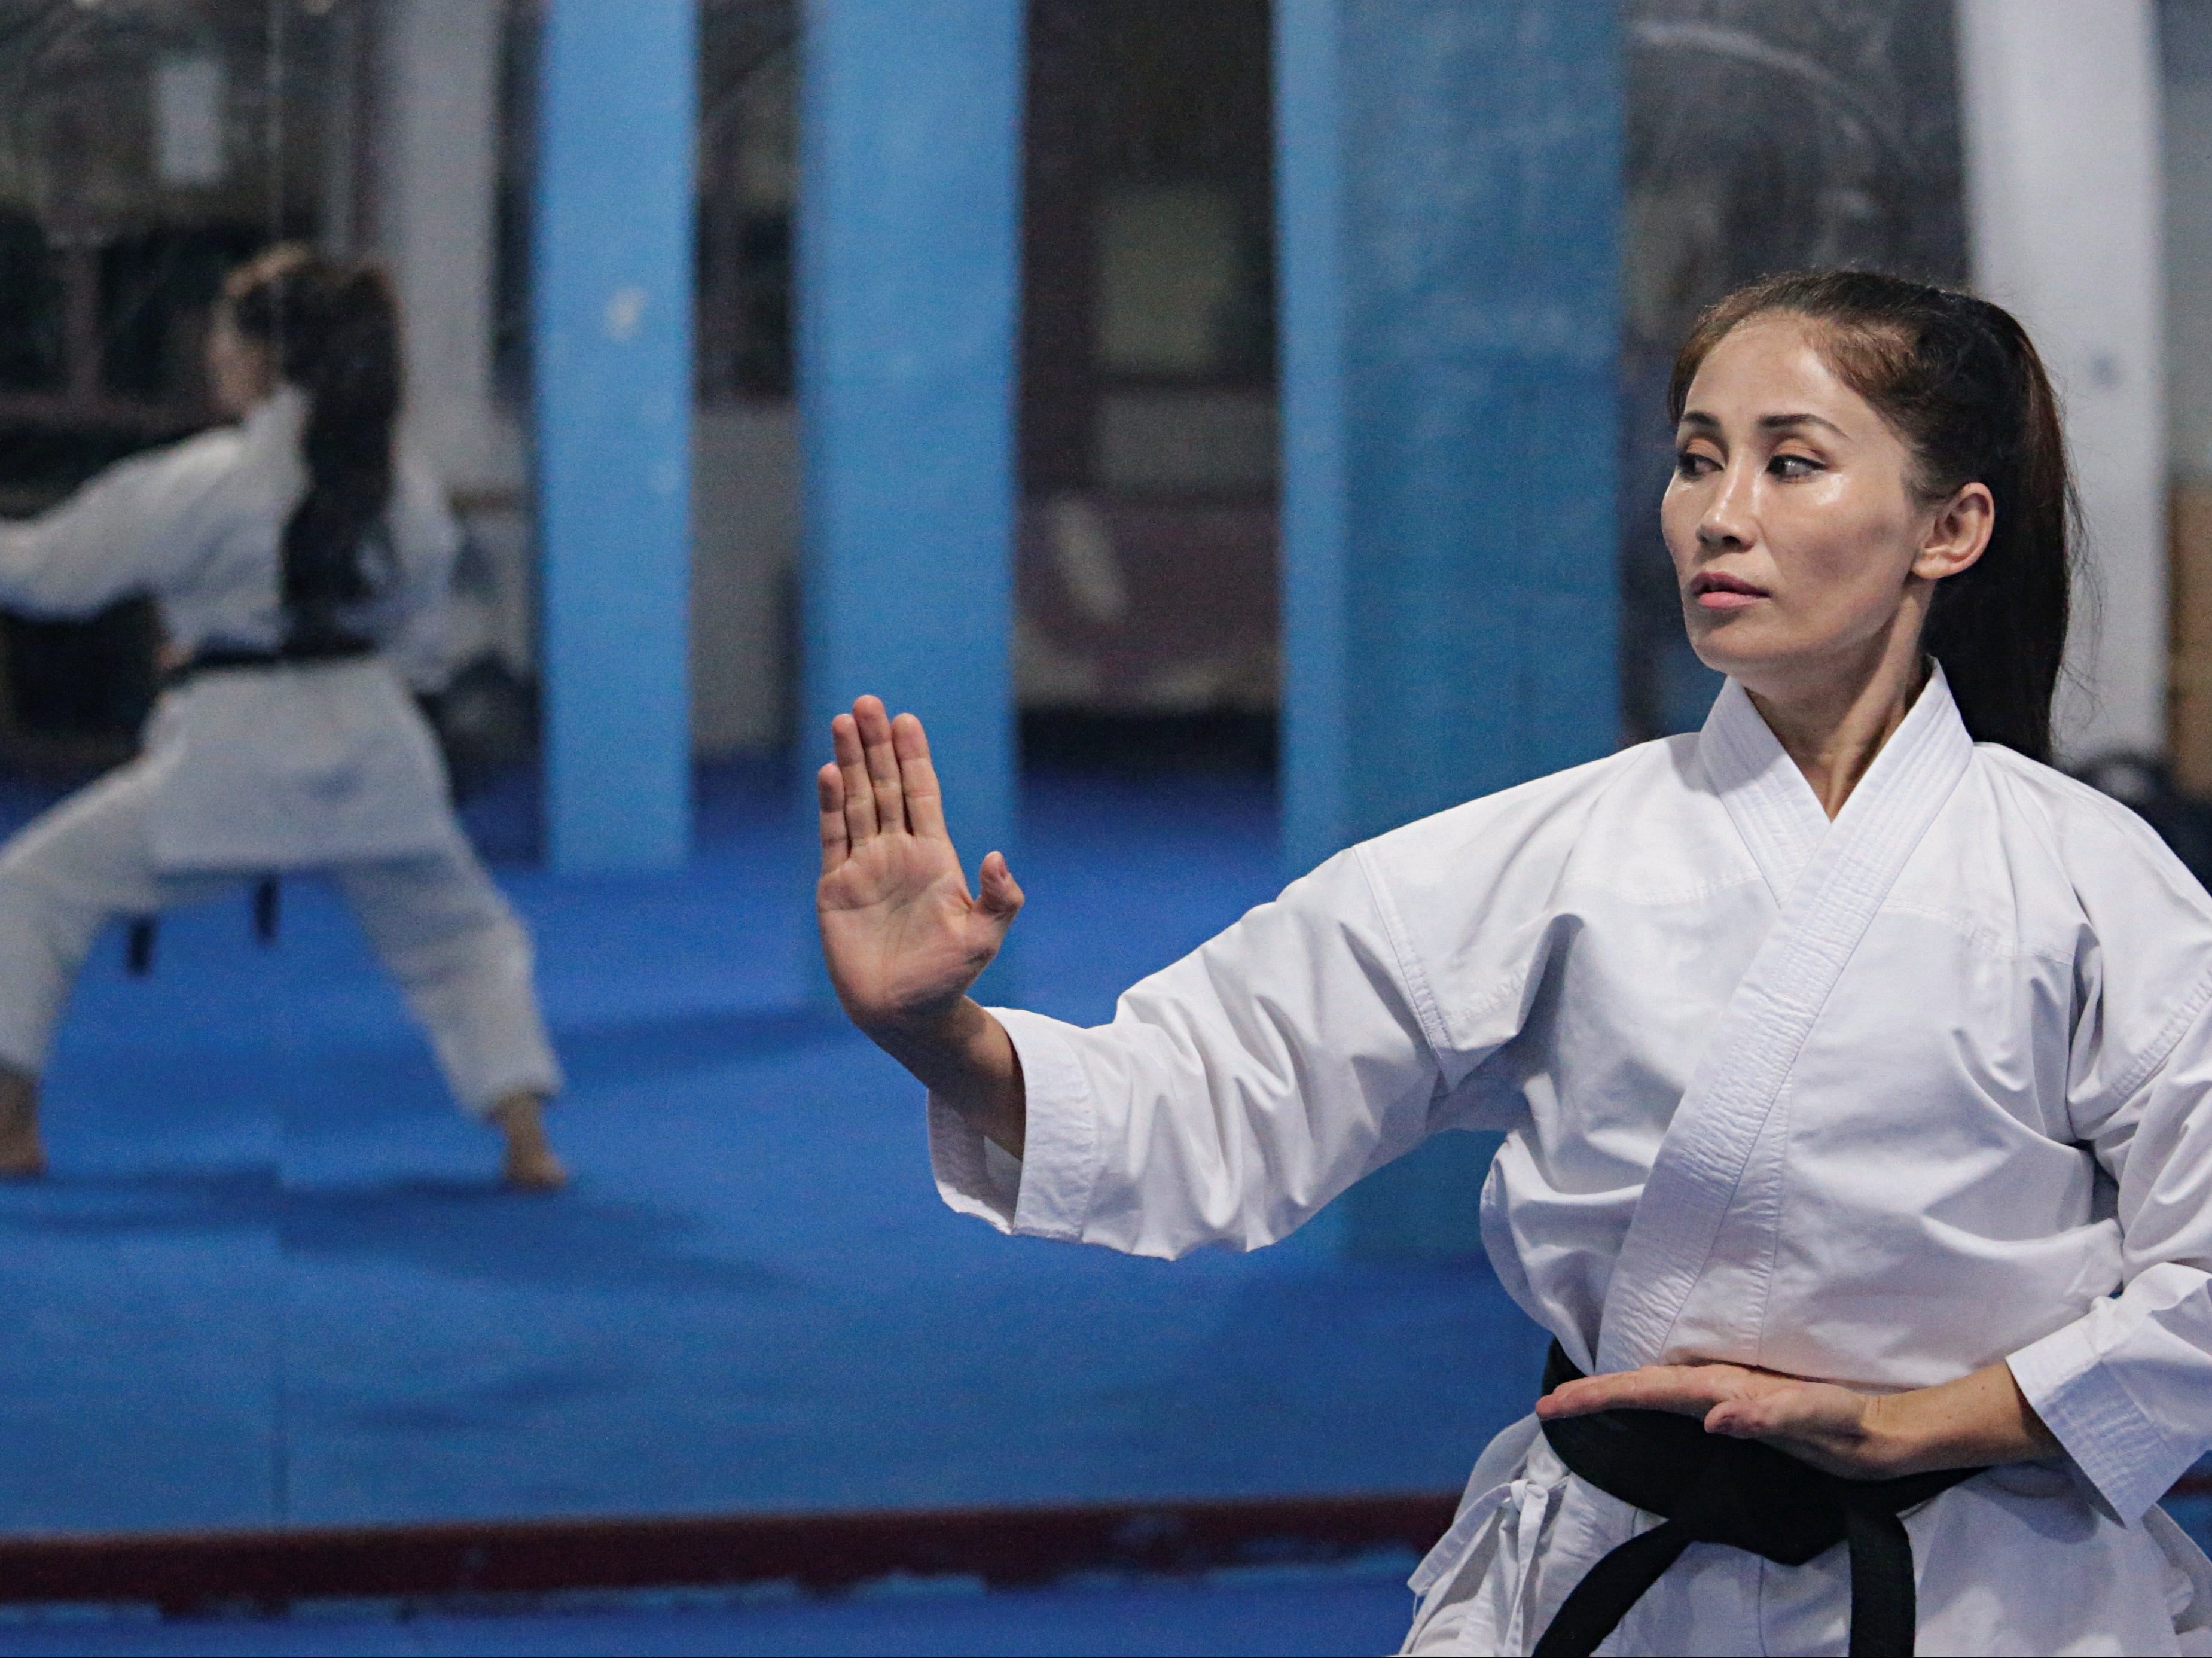 Meena Asadi fled Afghanistan years before and now teaches karate to refugees in Indonesia